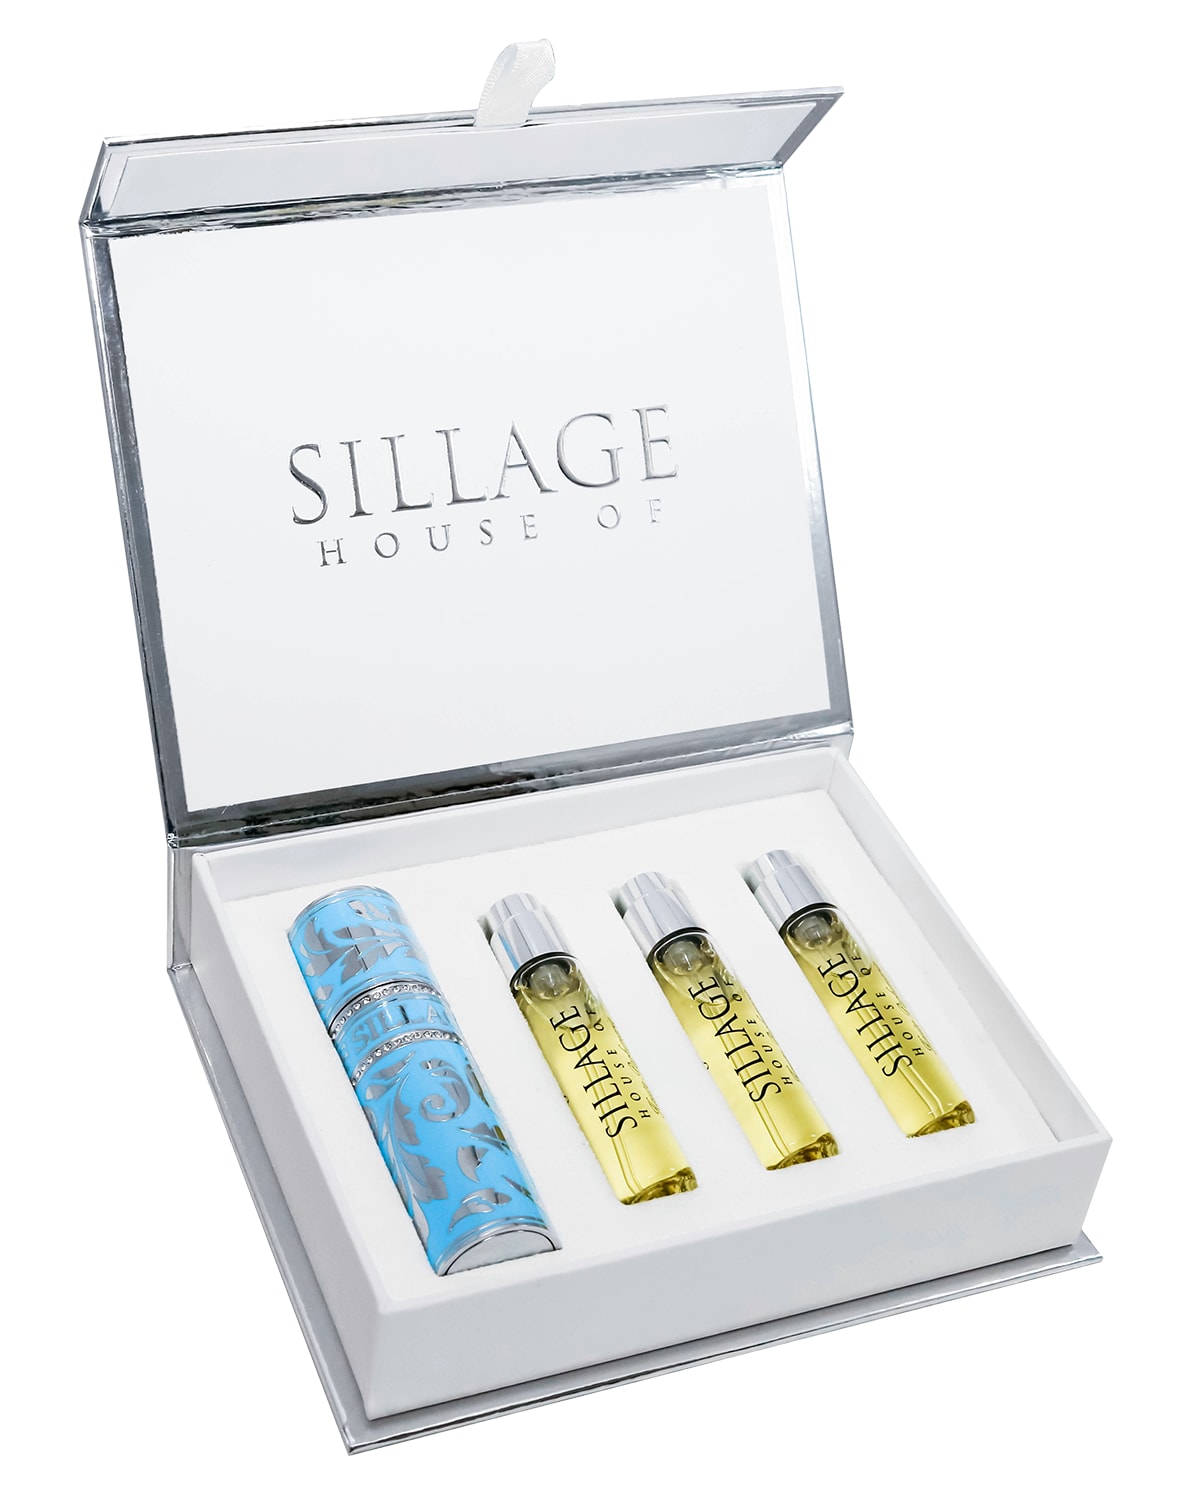 House of Sillage Love Air Travel Spray with Refills, 0.3 oz./ 8.0 mL